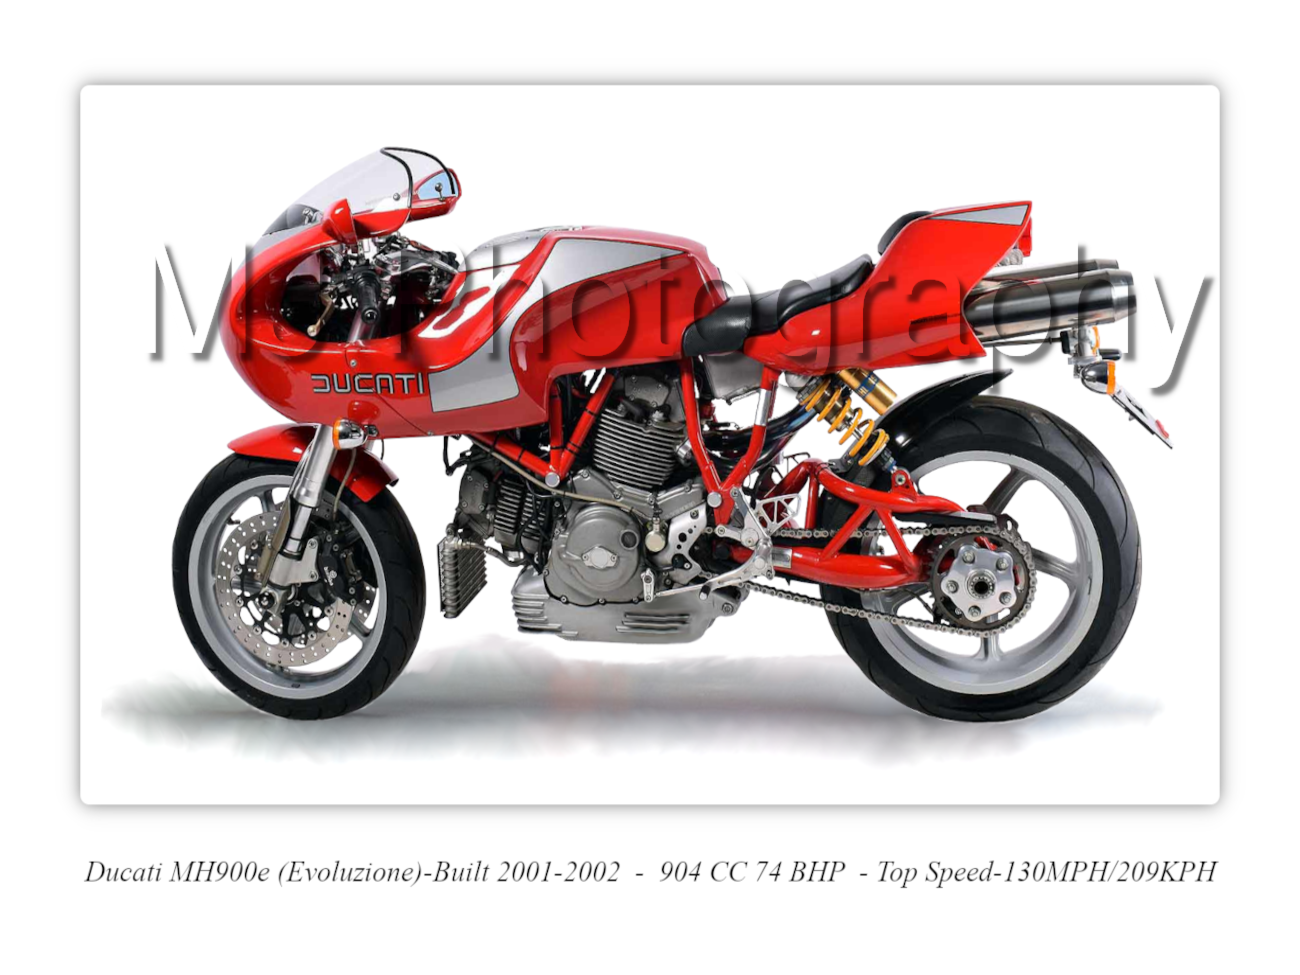 Ducati MH900e Motorcycle - A3/A4 Poster